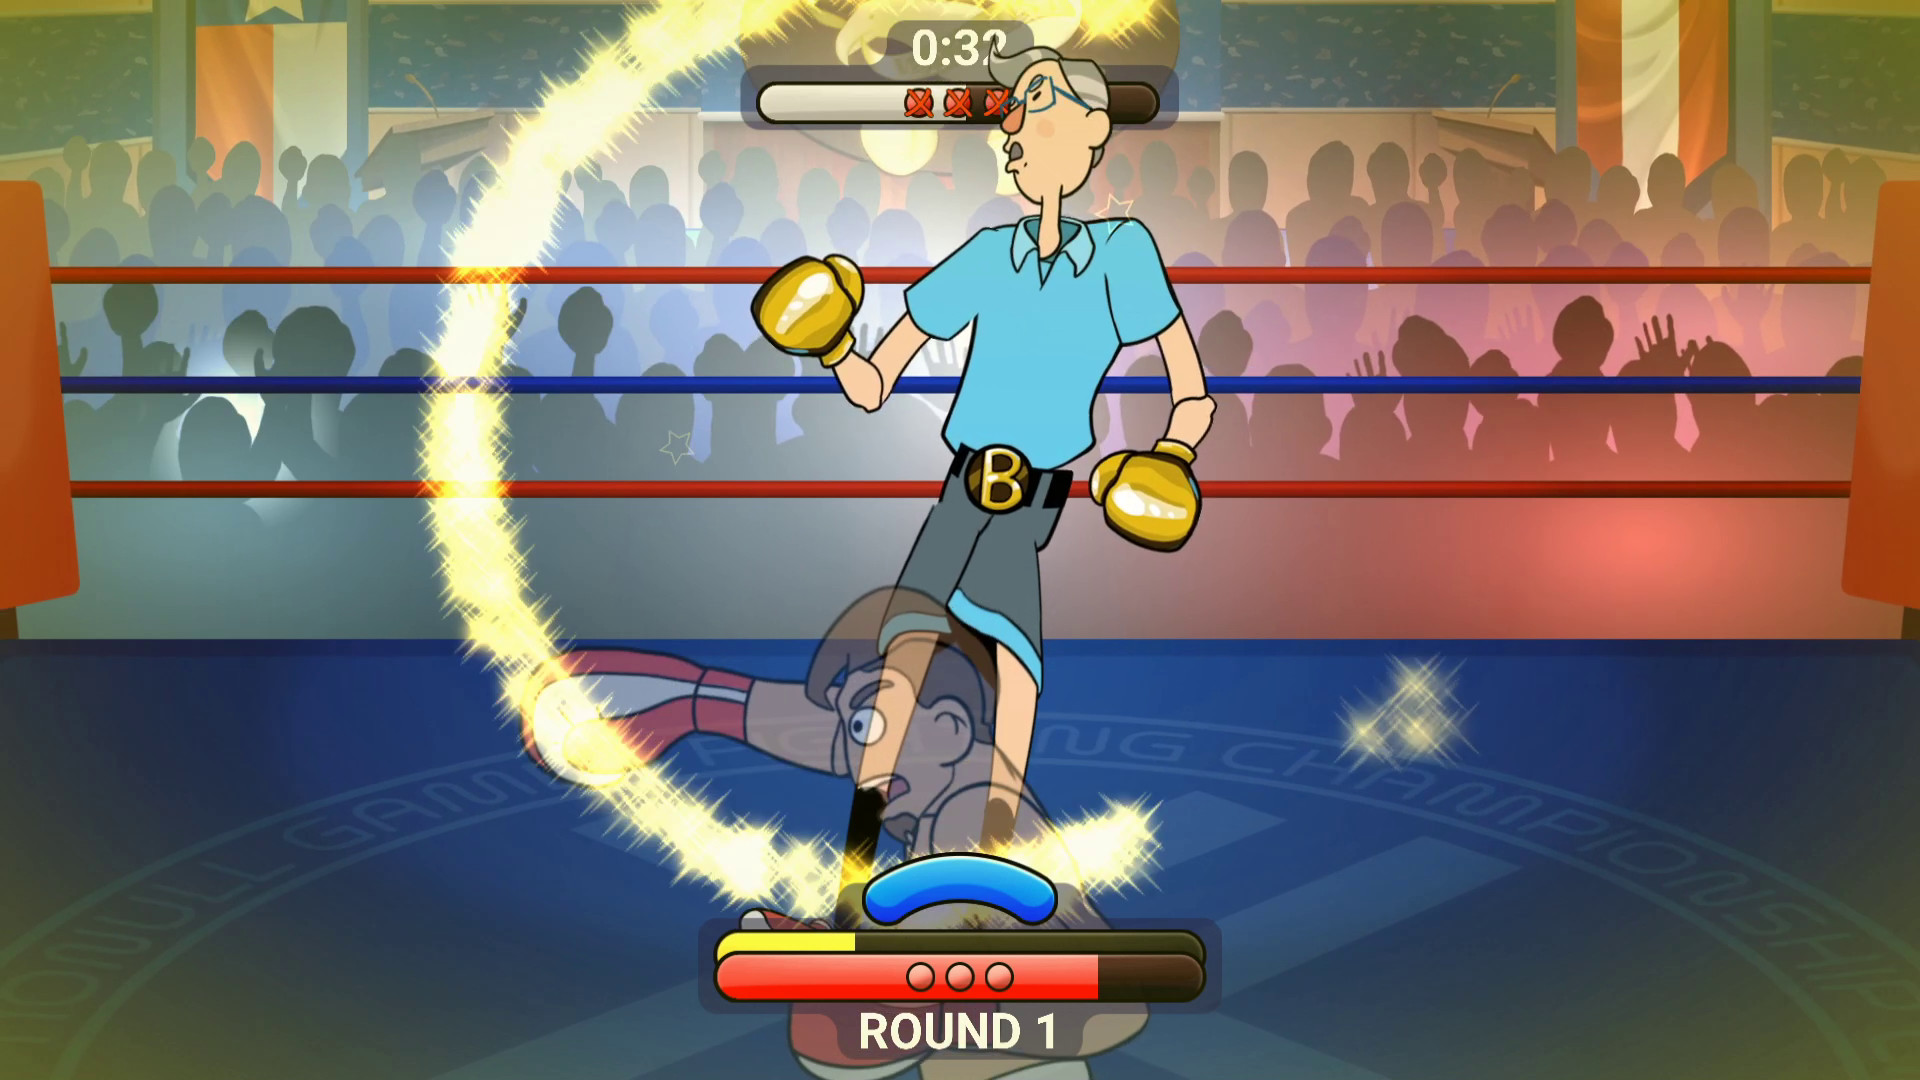 Election Year Knockout Free Download